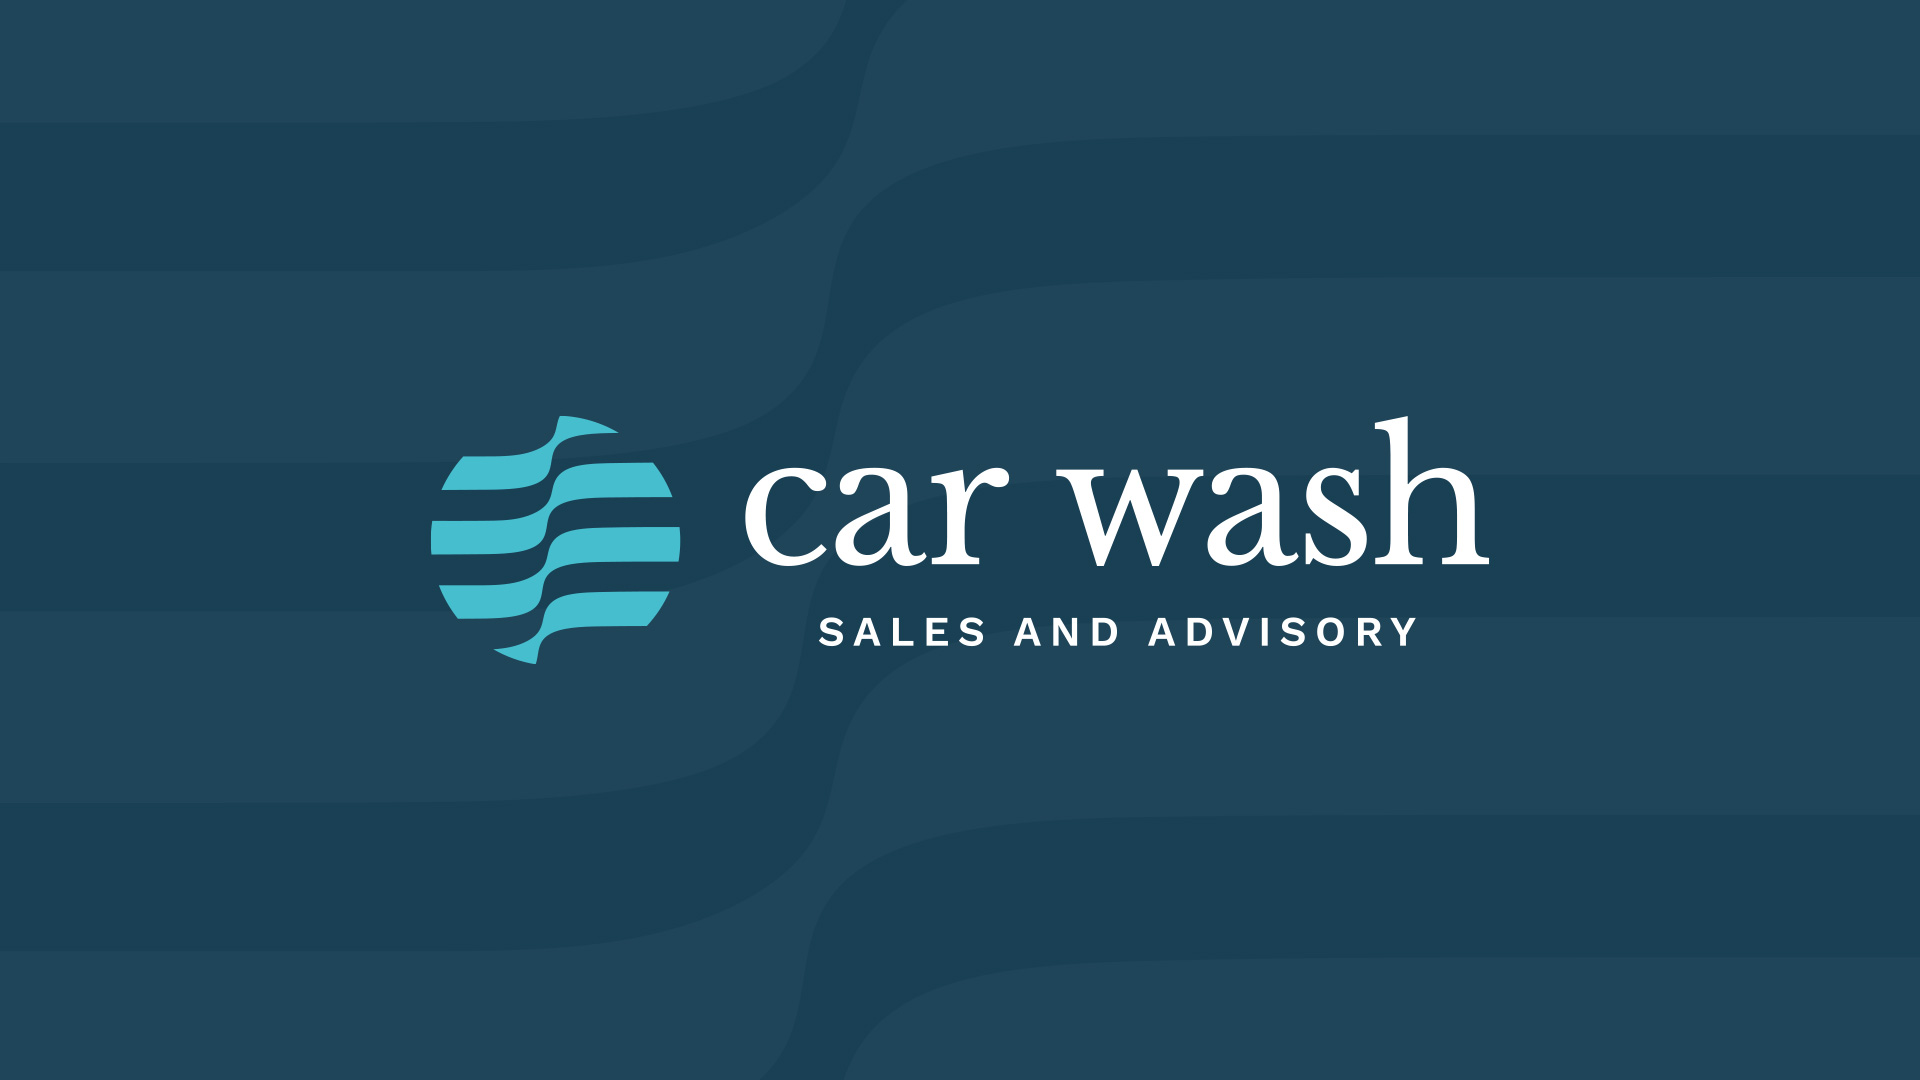 Car Wash Sales and Advisory project image